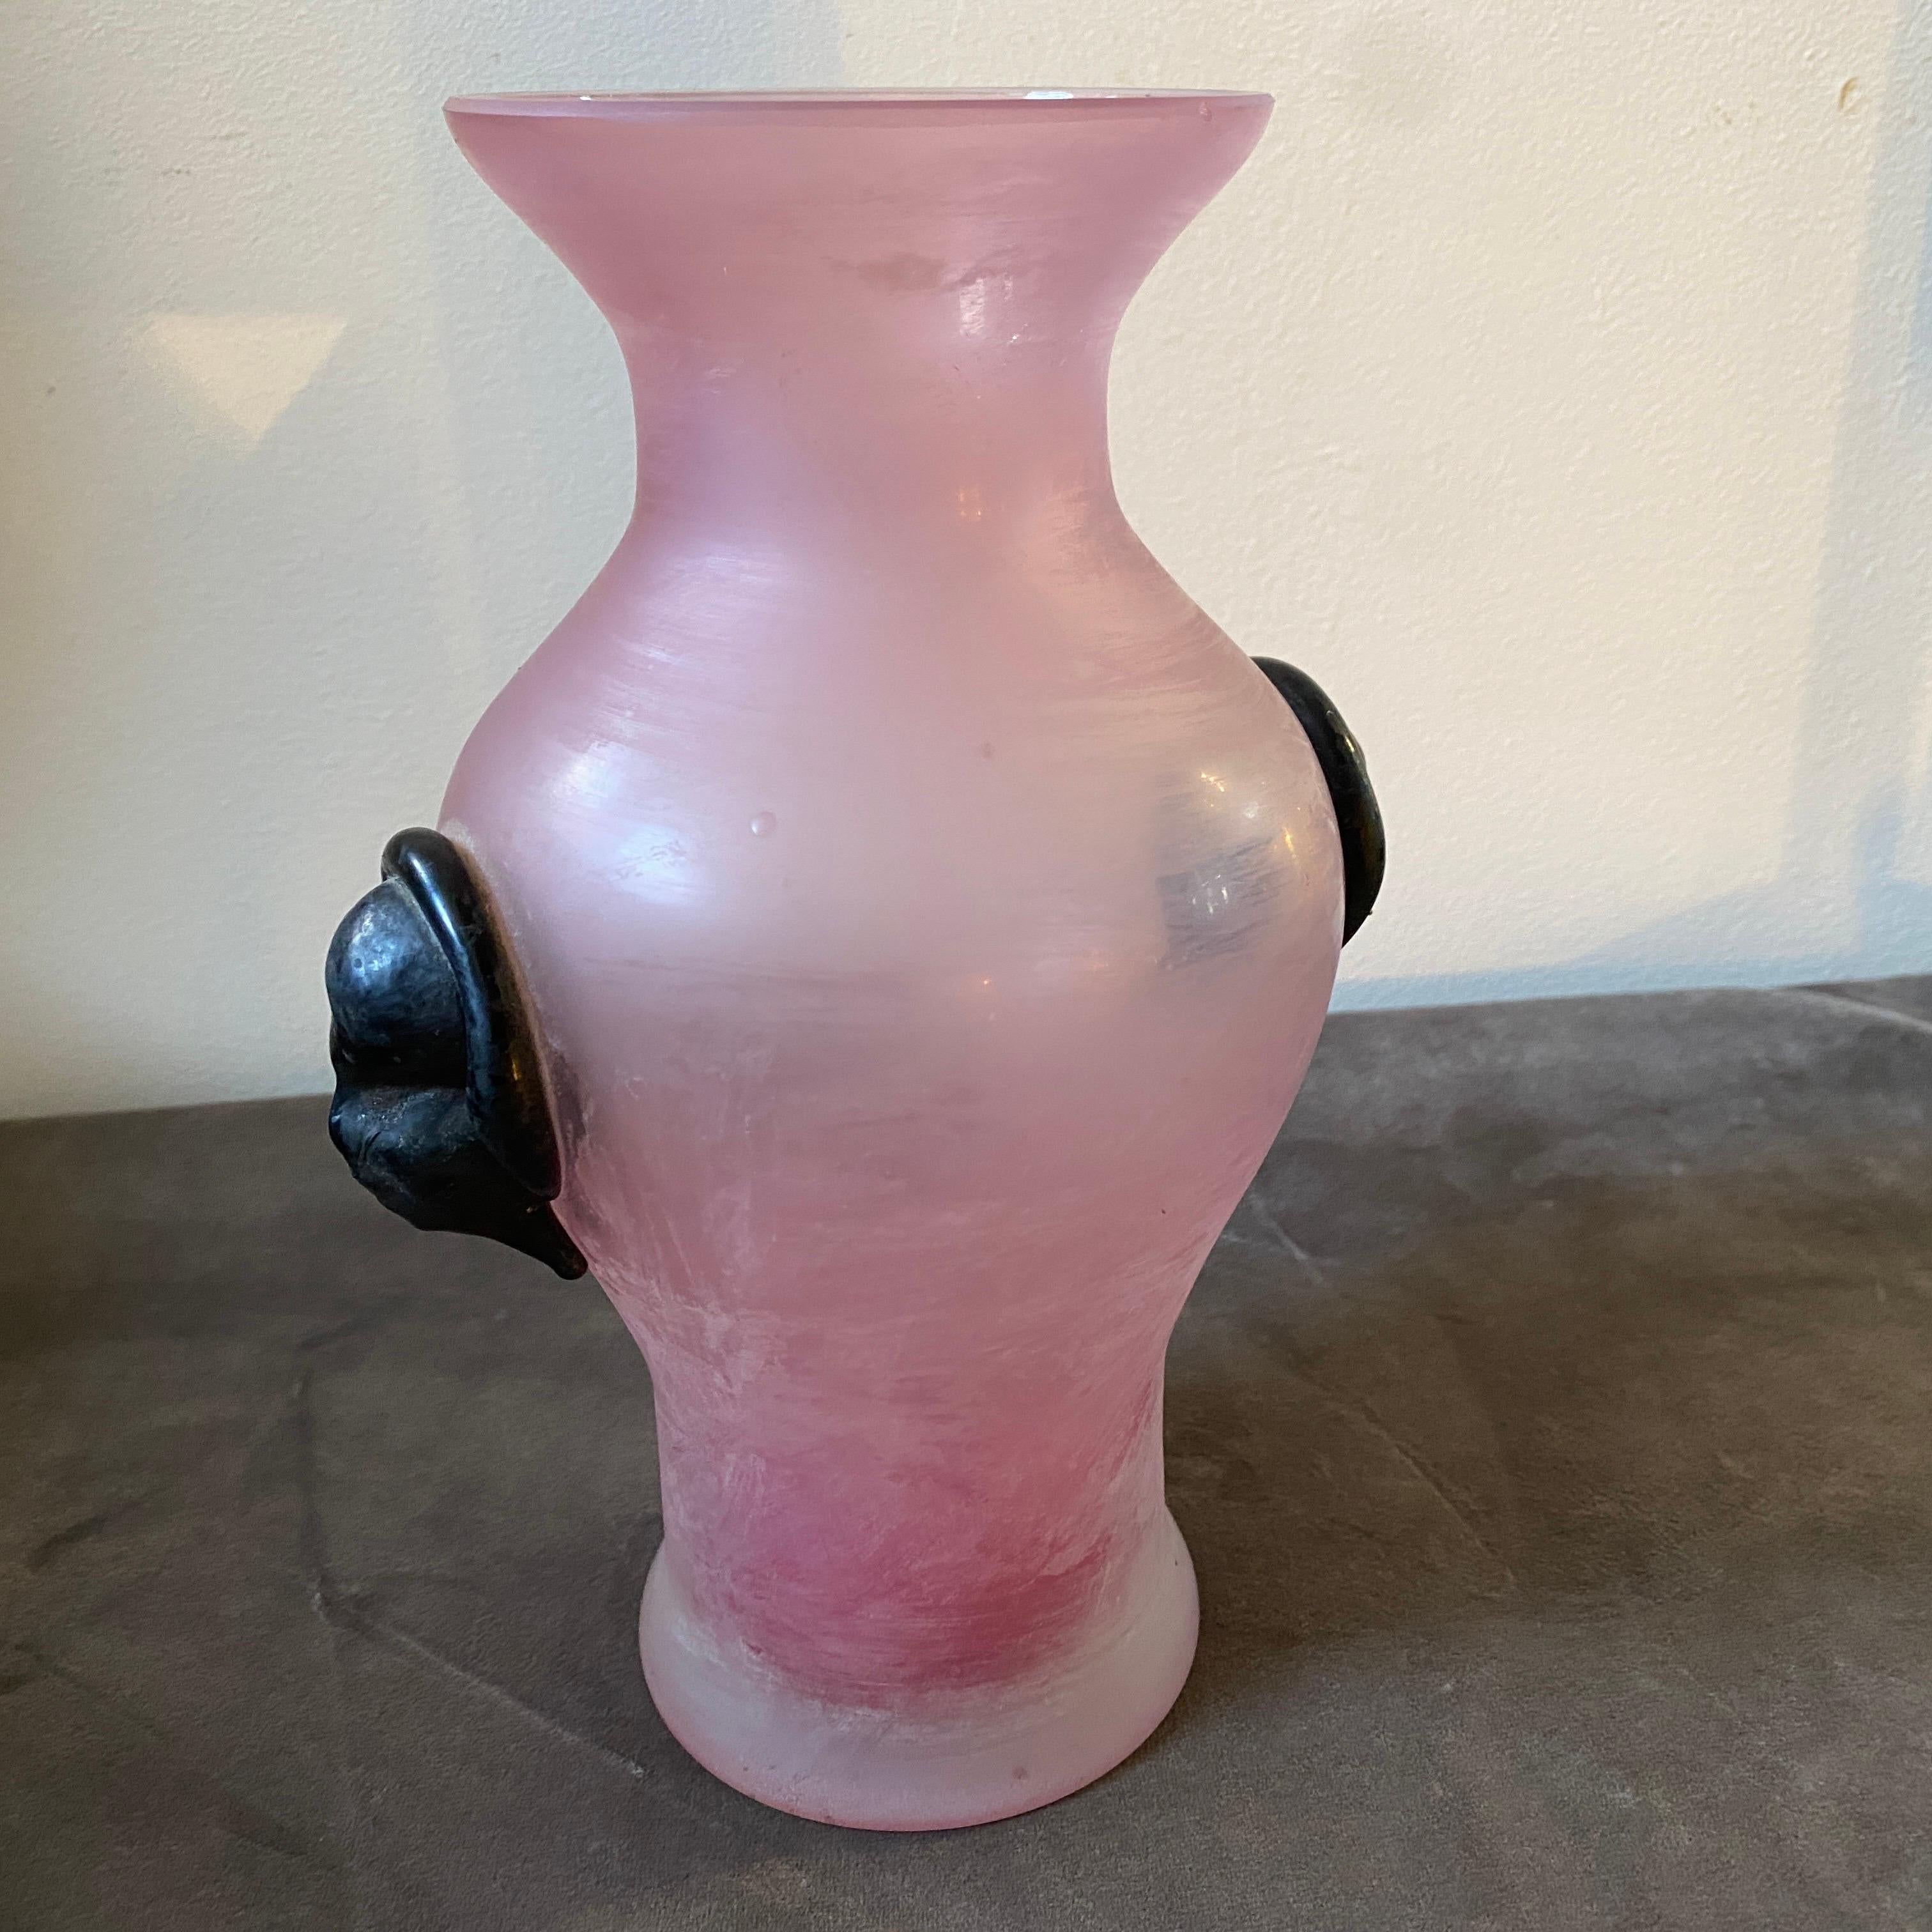 An high quality pink scavo murano glass vase with two applied black glass masks attributed to Cenedese. It's in perfect conditions. Crafted from Murano glass, known for its exceptional clarity, purity, and vibrant colors. The Scavo technique